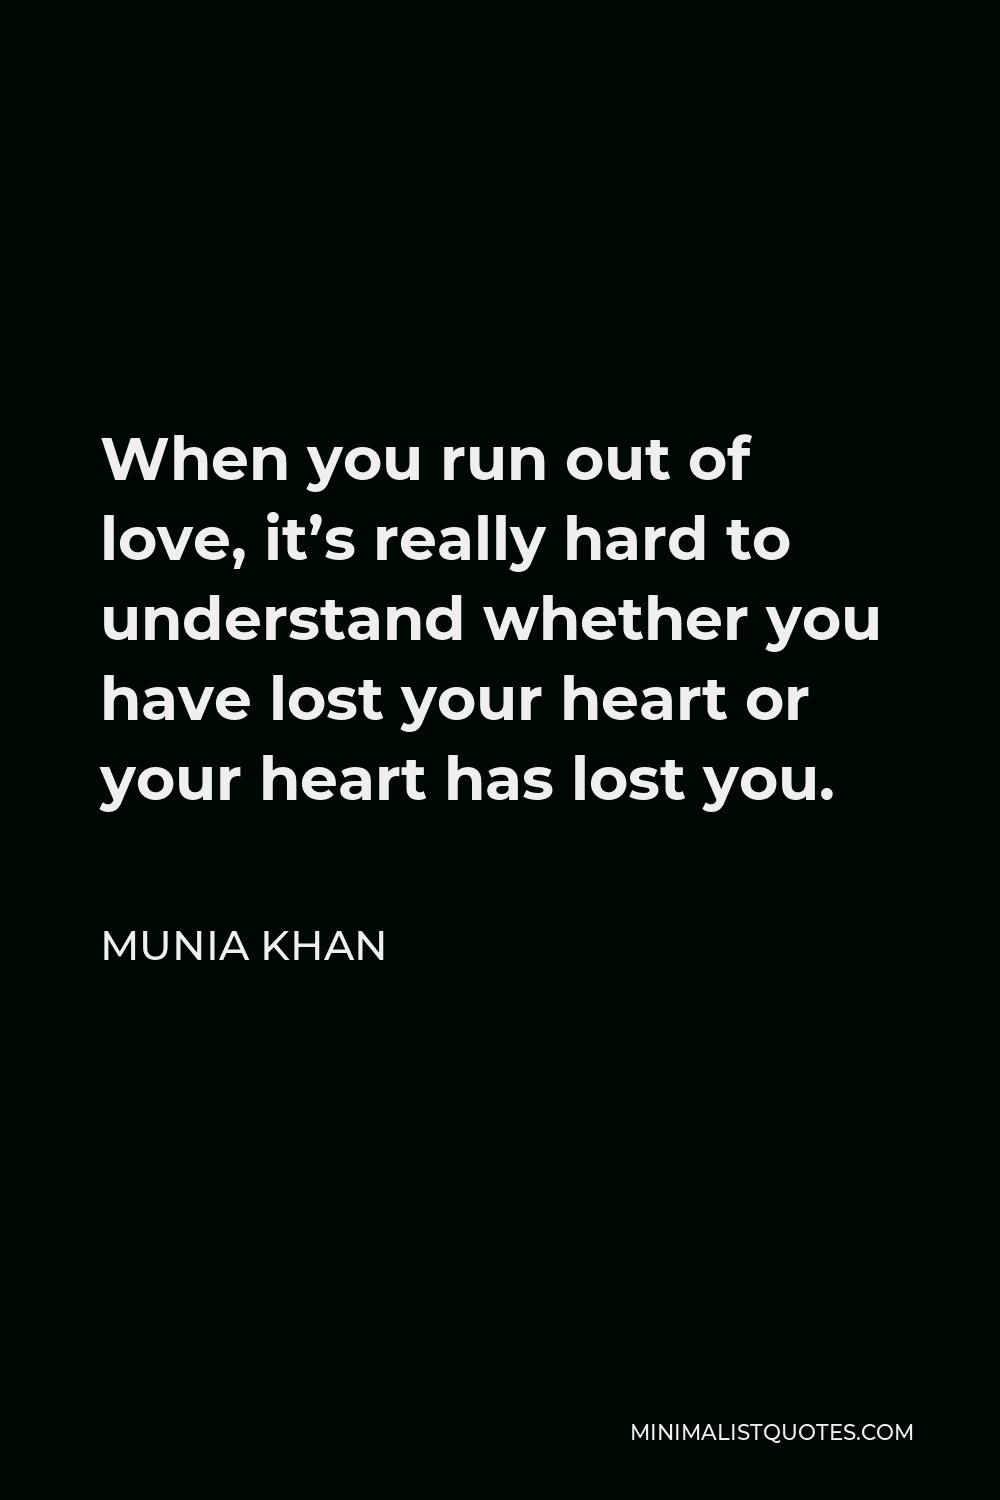 Munia Khan Quote - When you run out of love, it’s really hard to understand whether you have lost your heart or your heart has lost you.